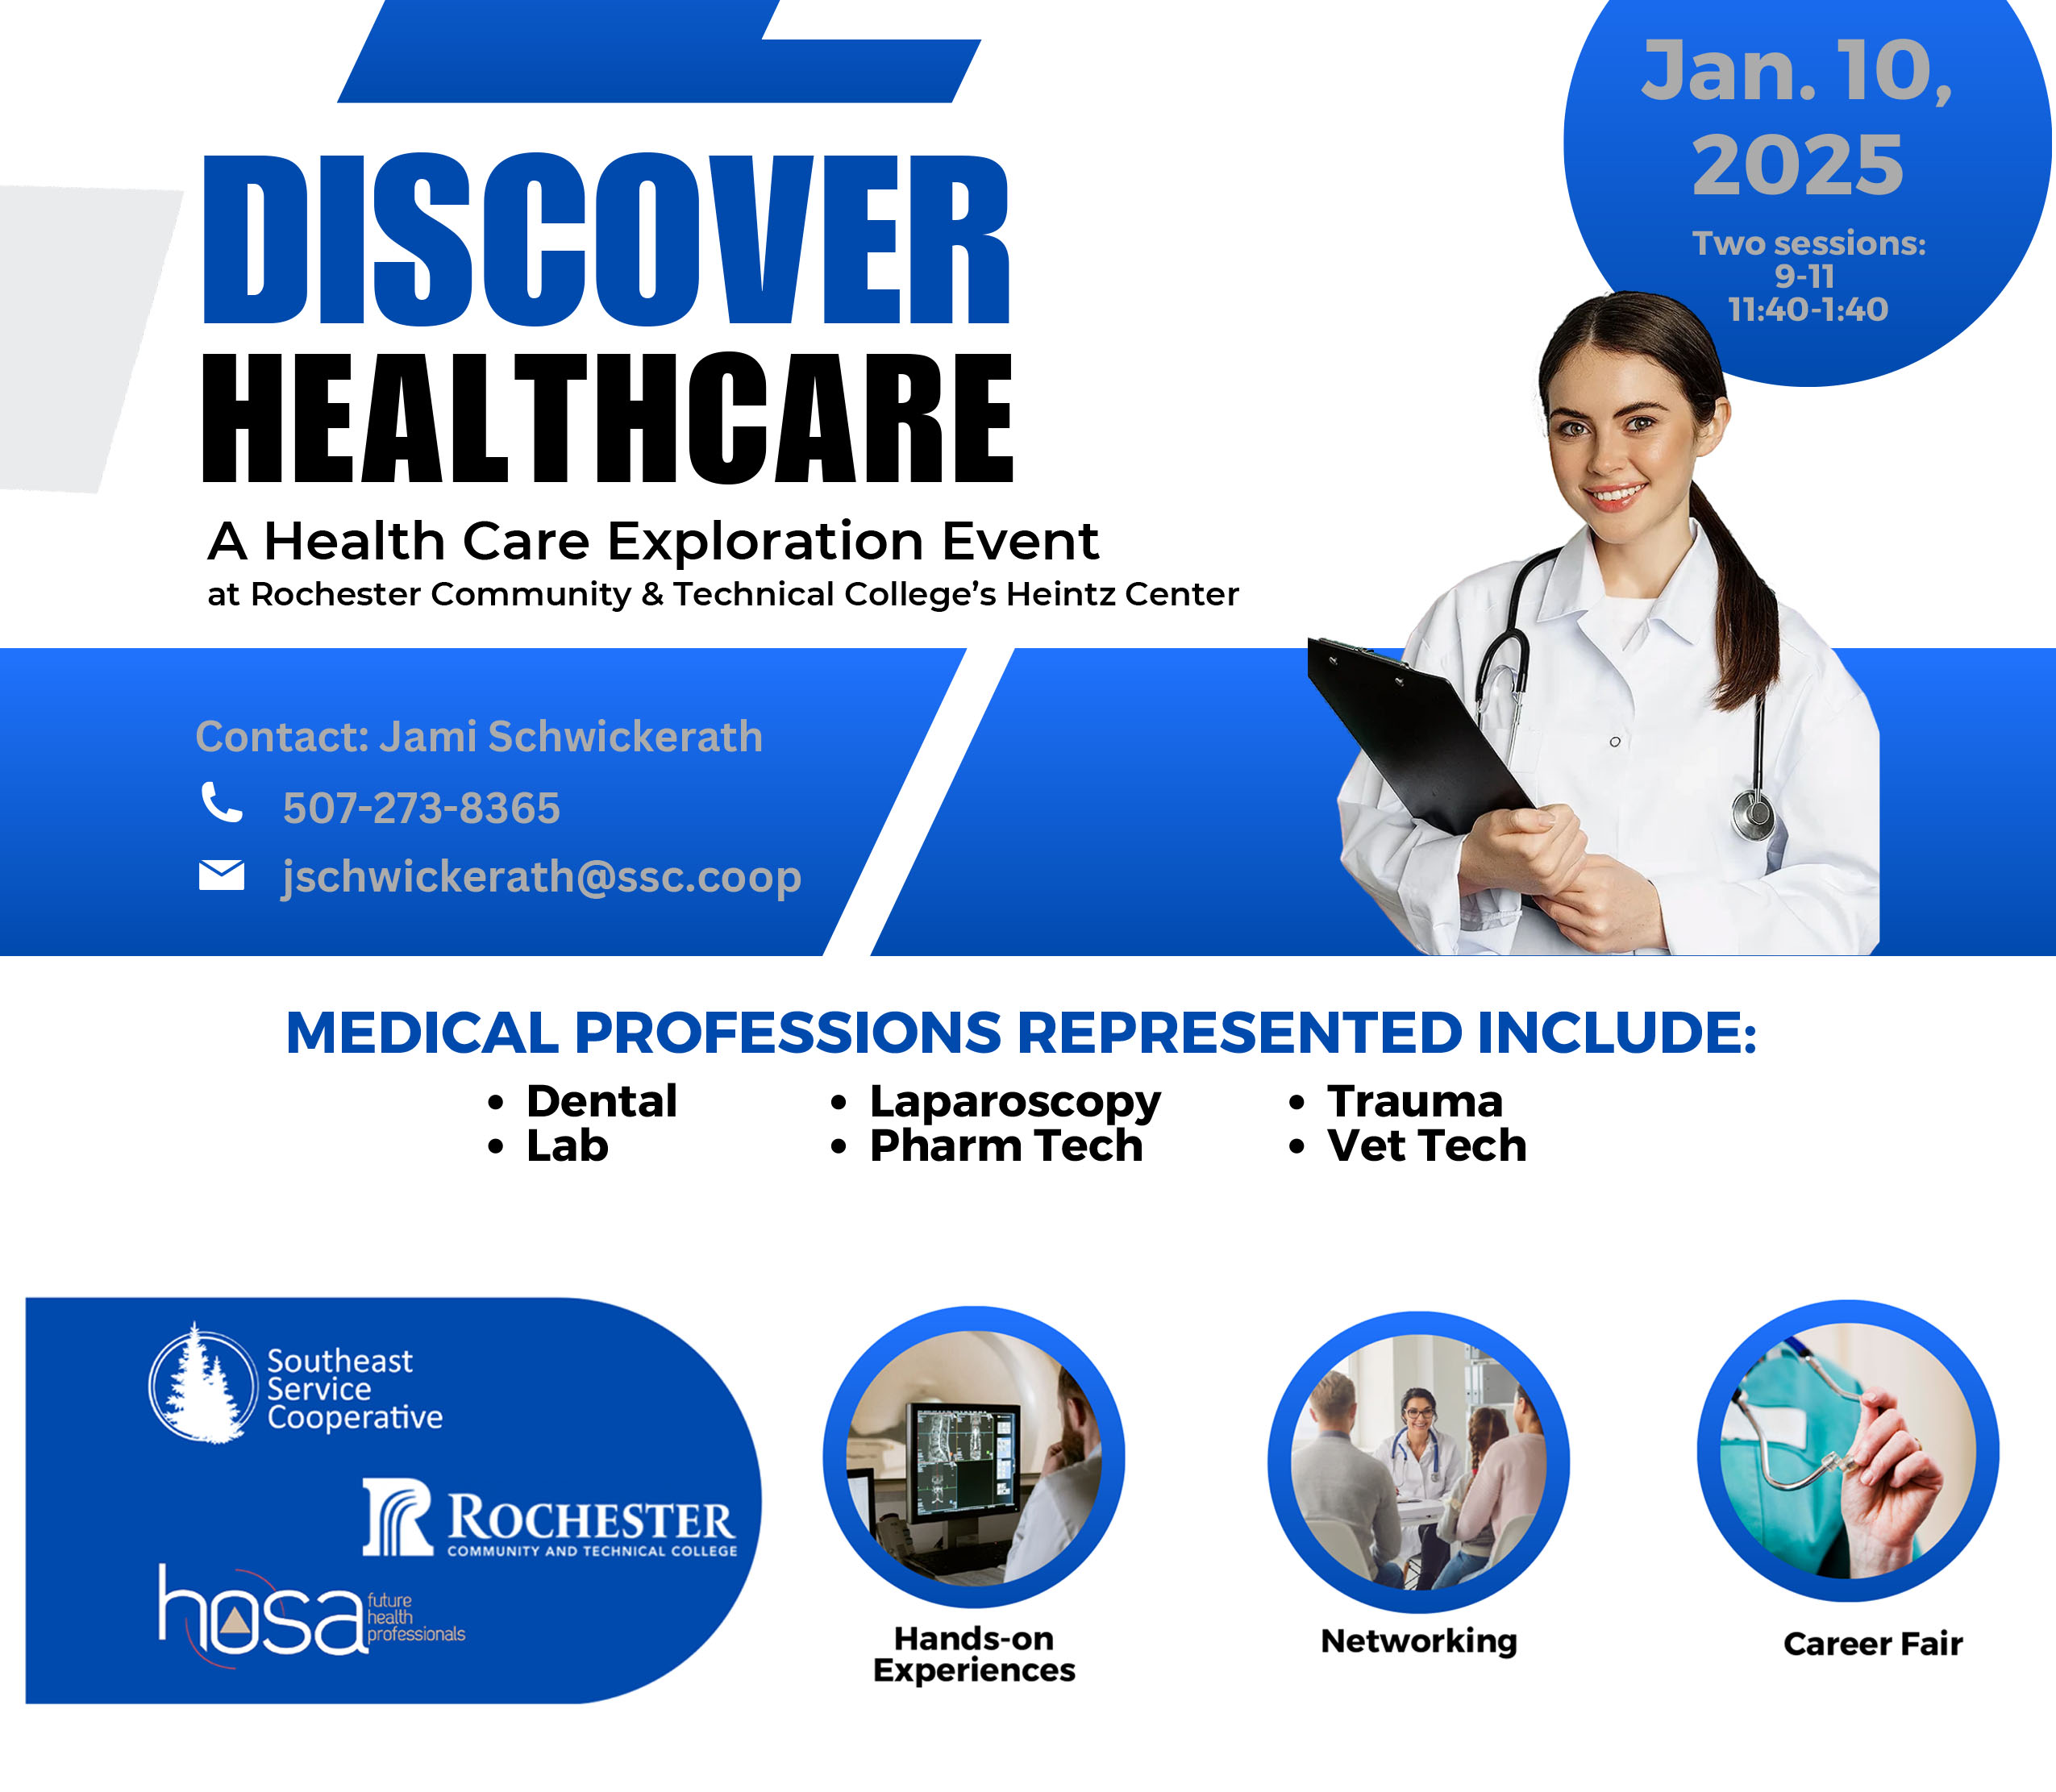 Discover Healthcare - January 10, 2025